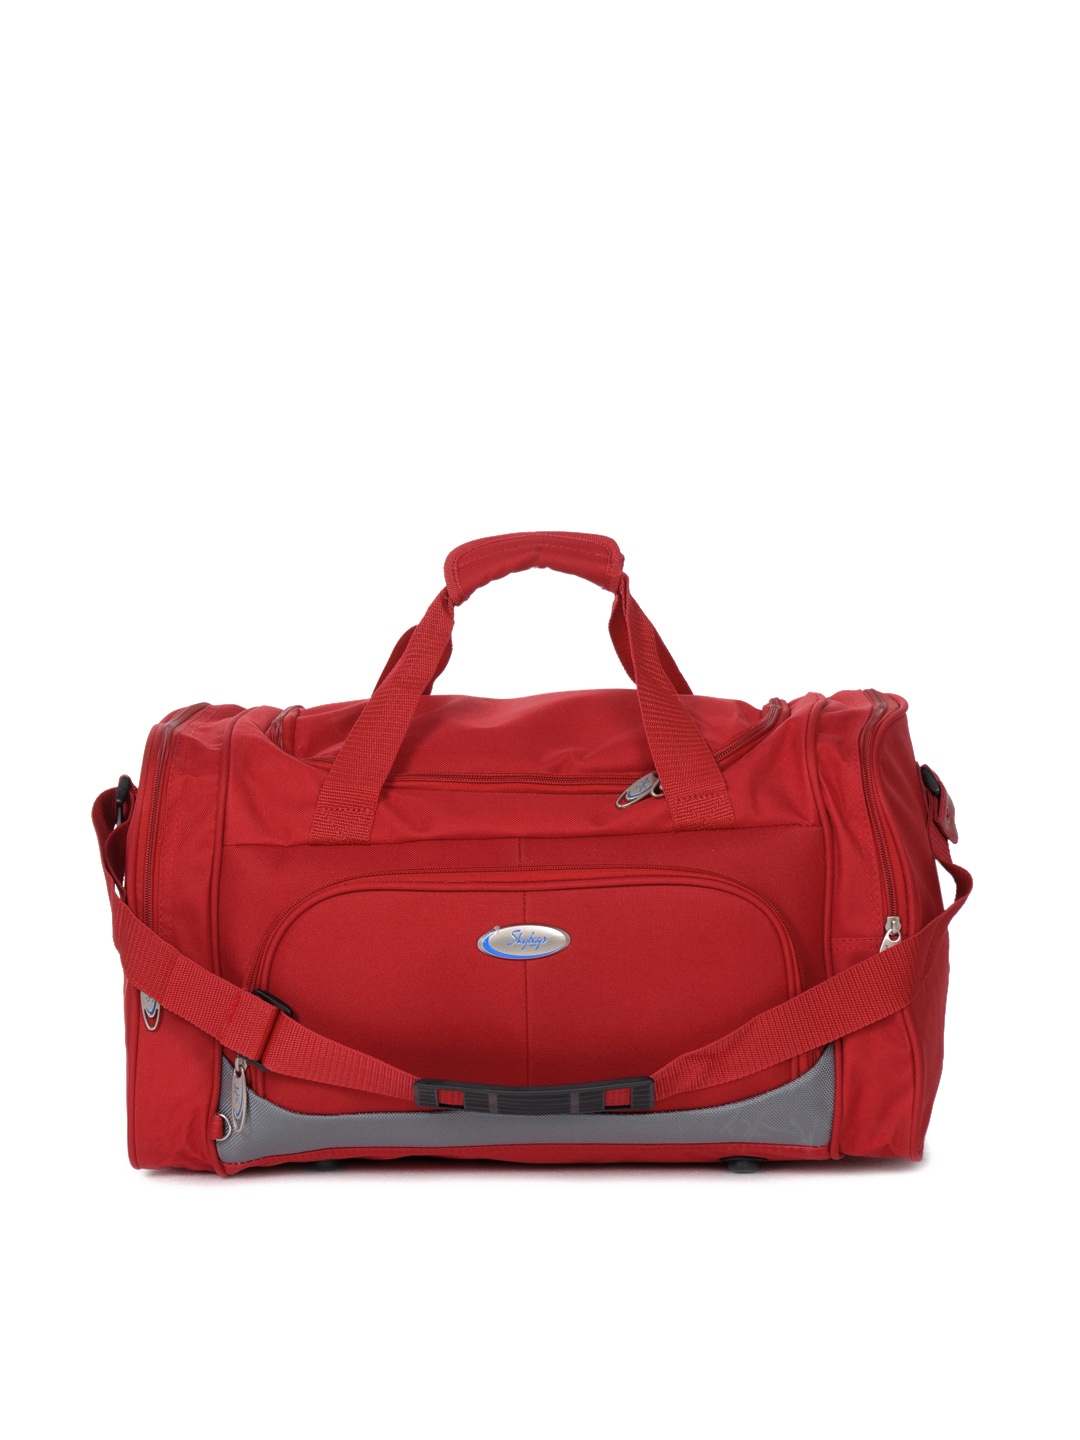 Skybags Unisex Red Duffle Bag